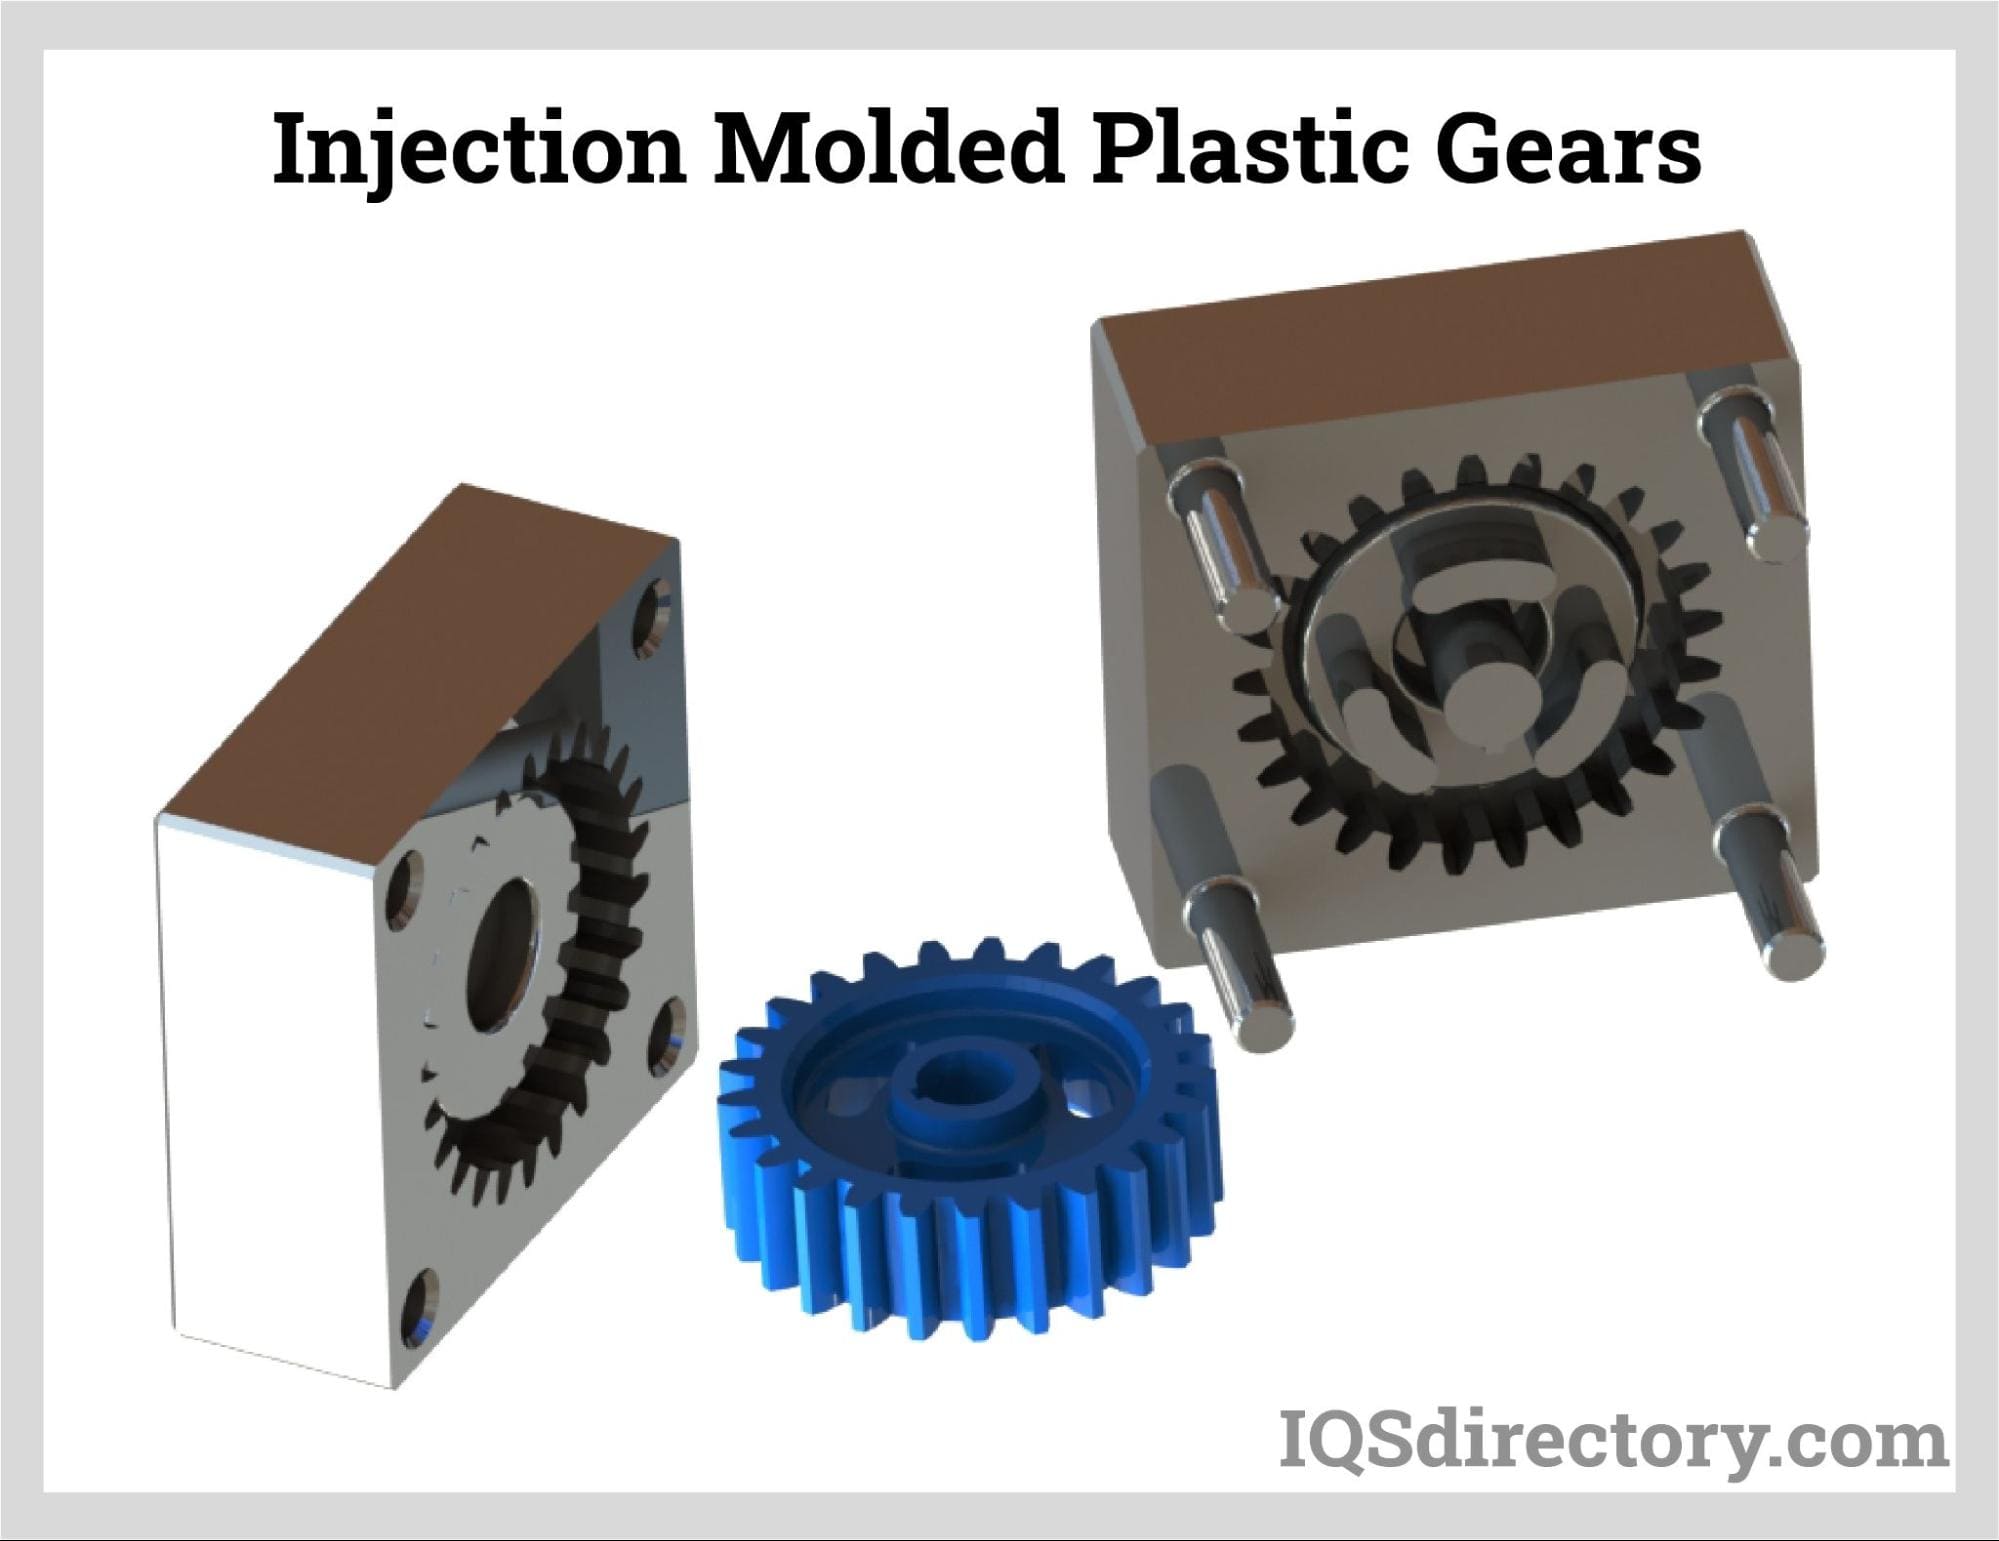  Injection Molded Plastic Gears